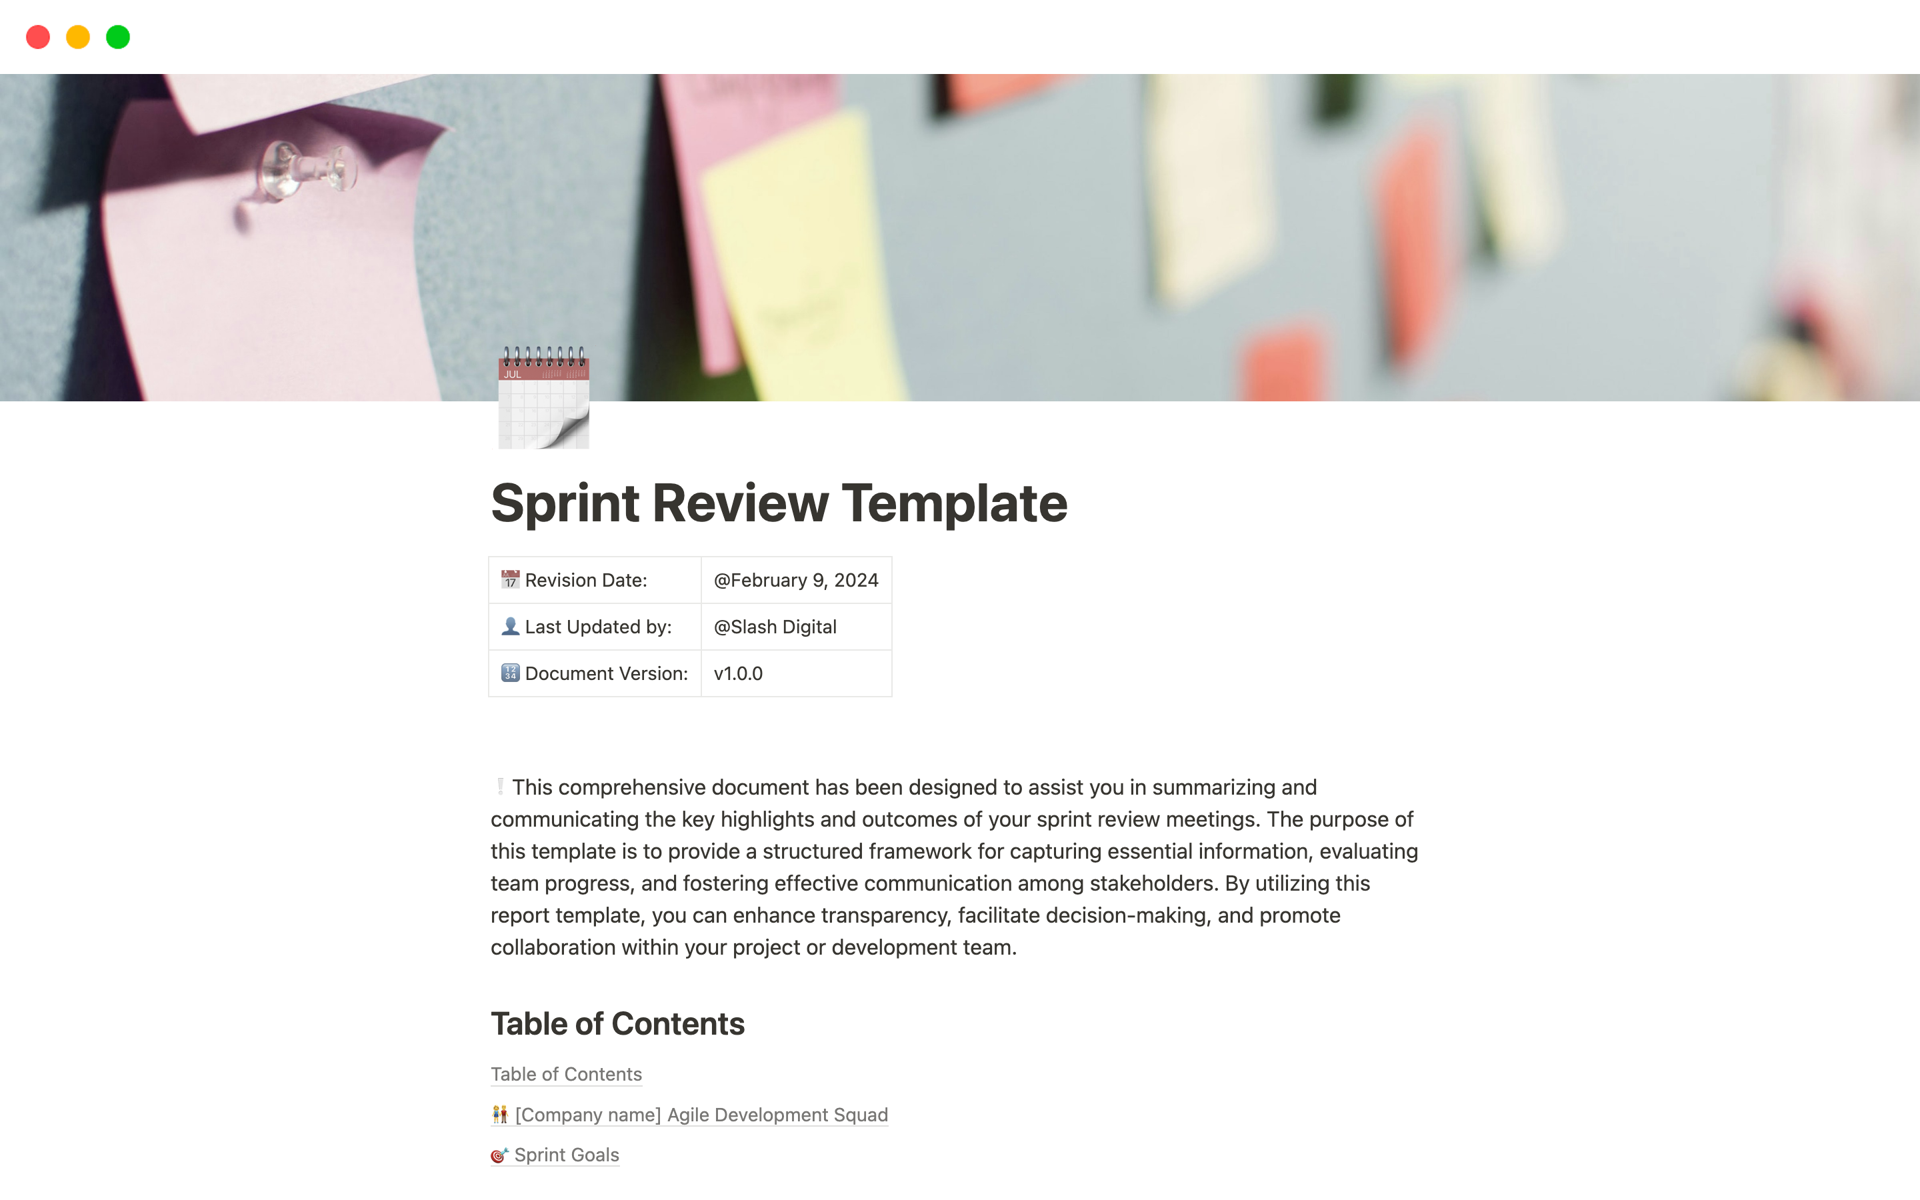 A template preview for Sprint Review